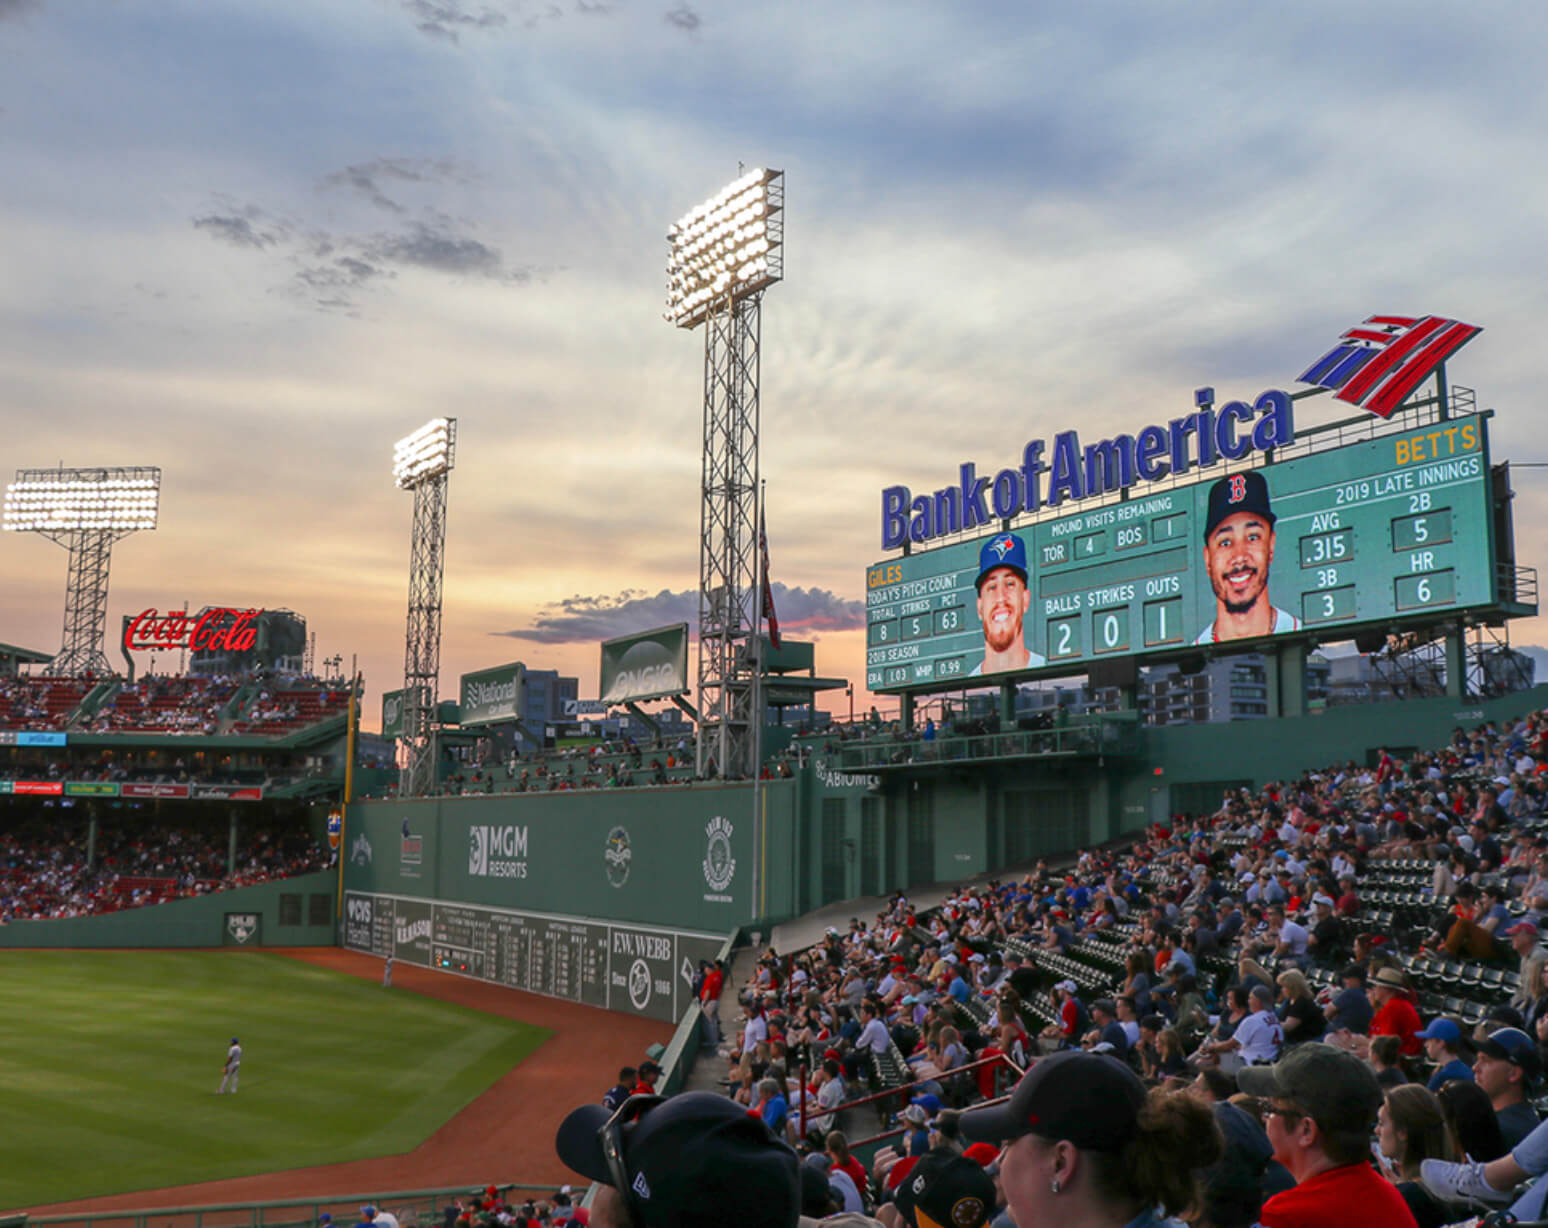 Where Do The Boston Red Sox Play?